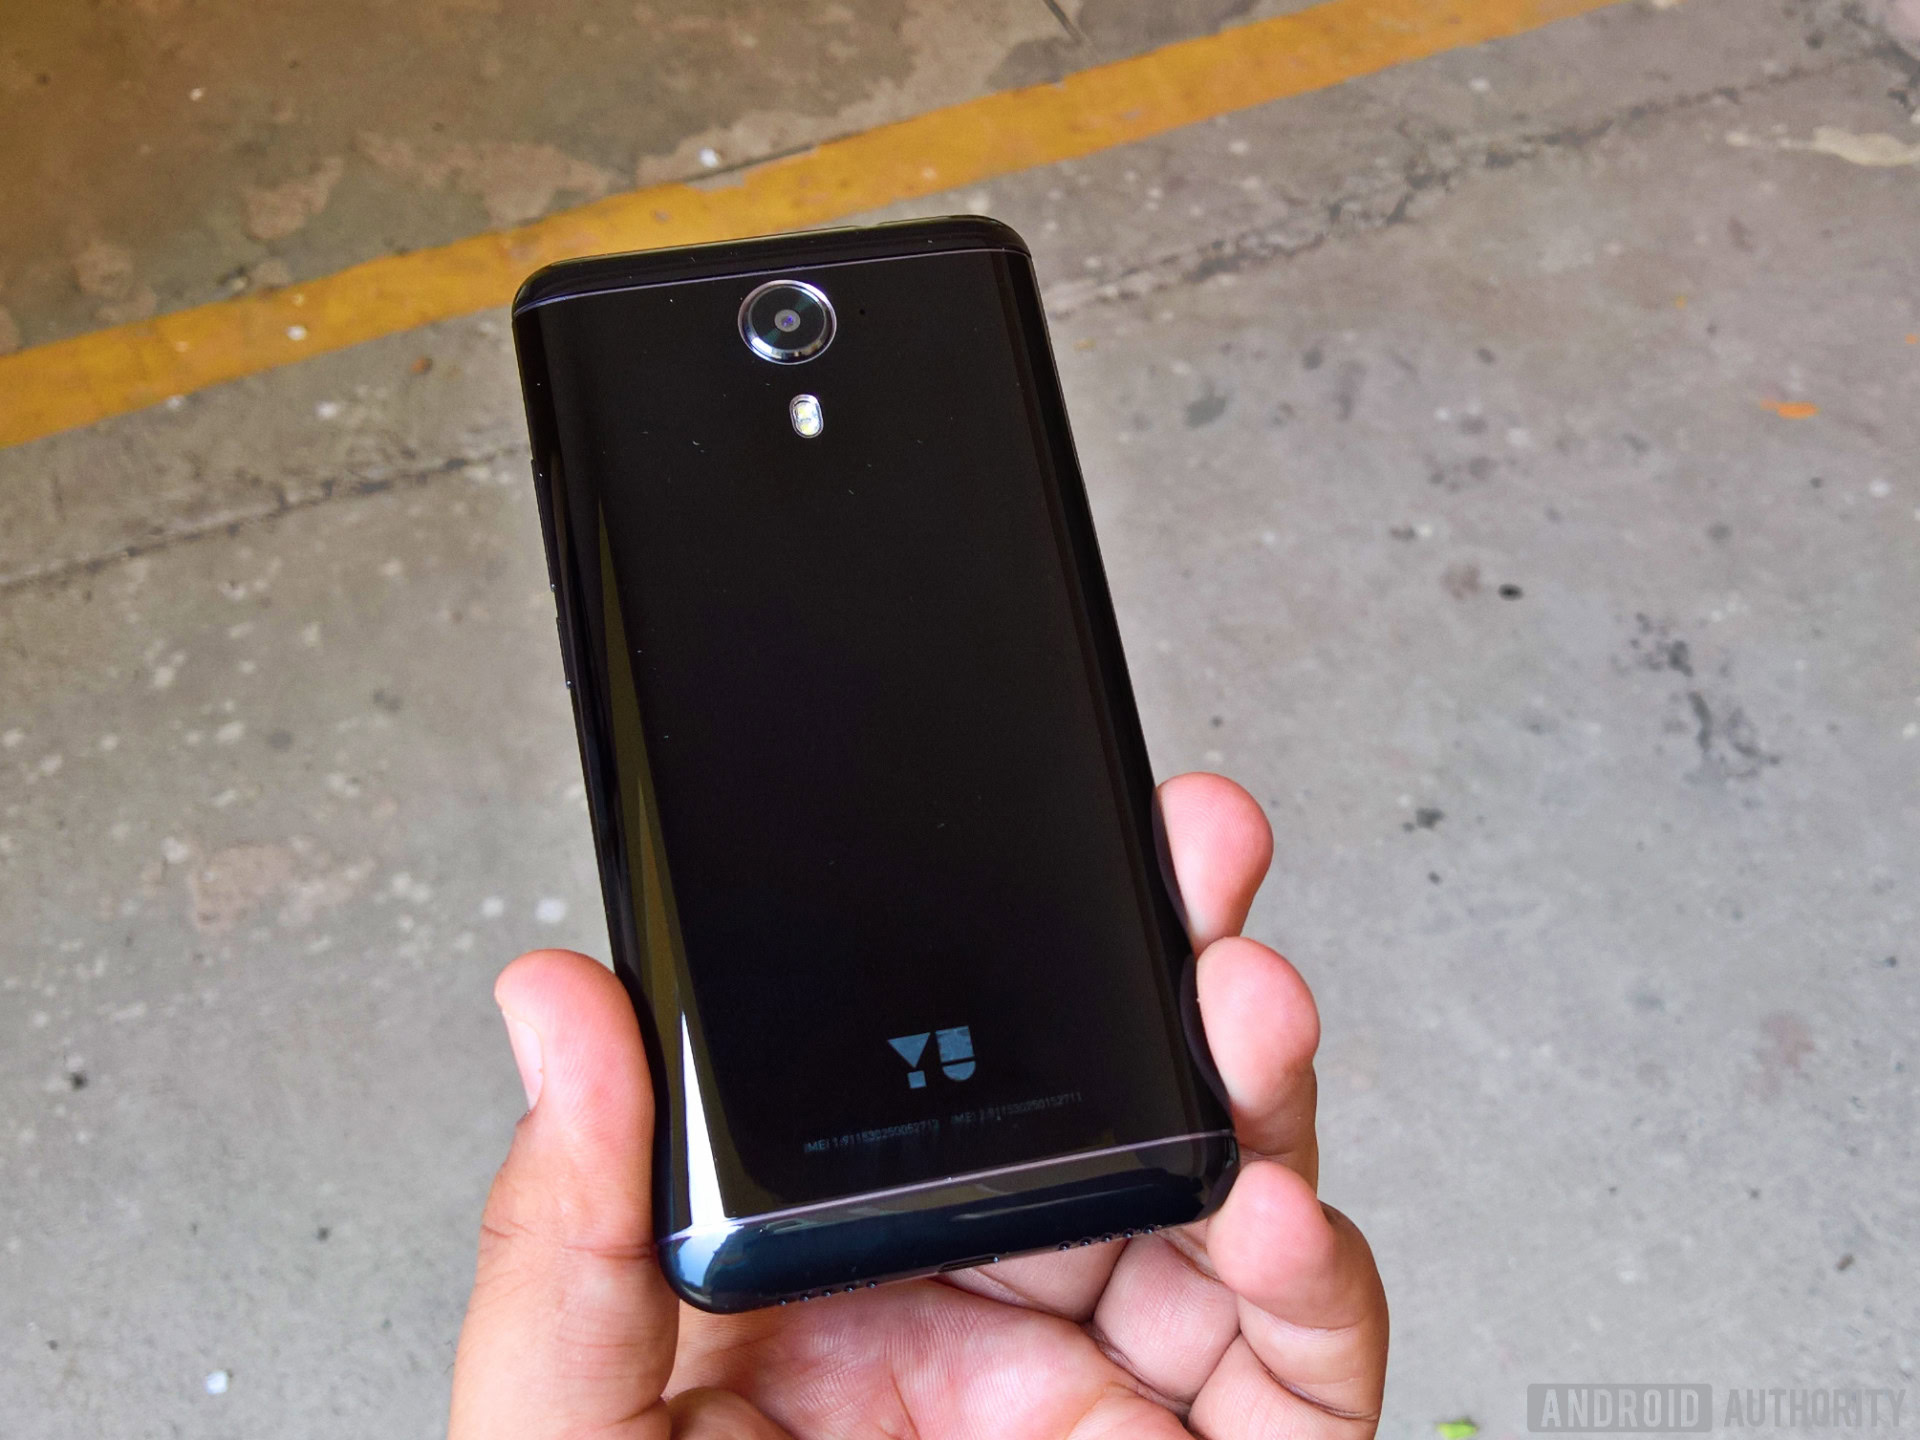 YU launches Yureka Black in India, and asserts it's not going anywhere -  Android Authority